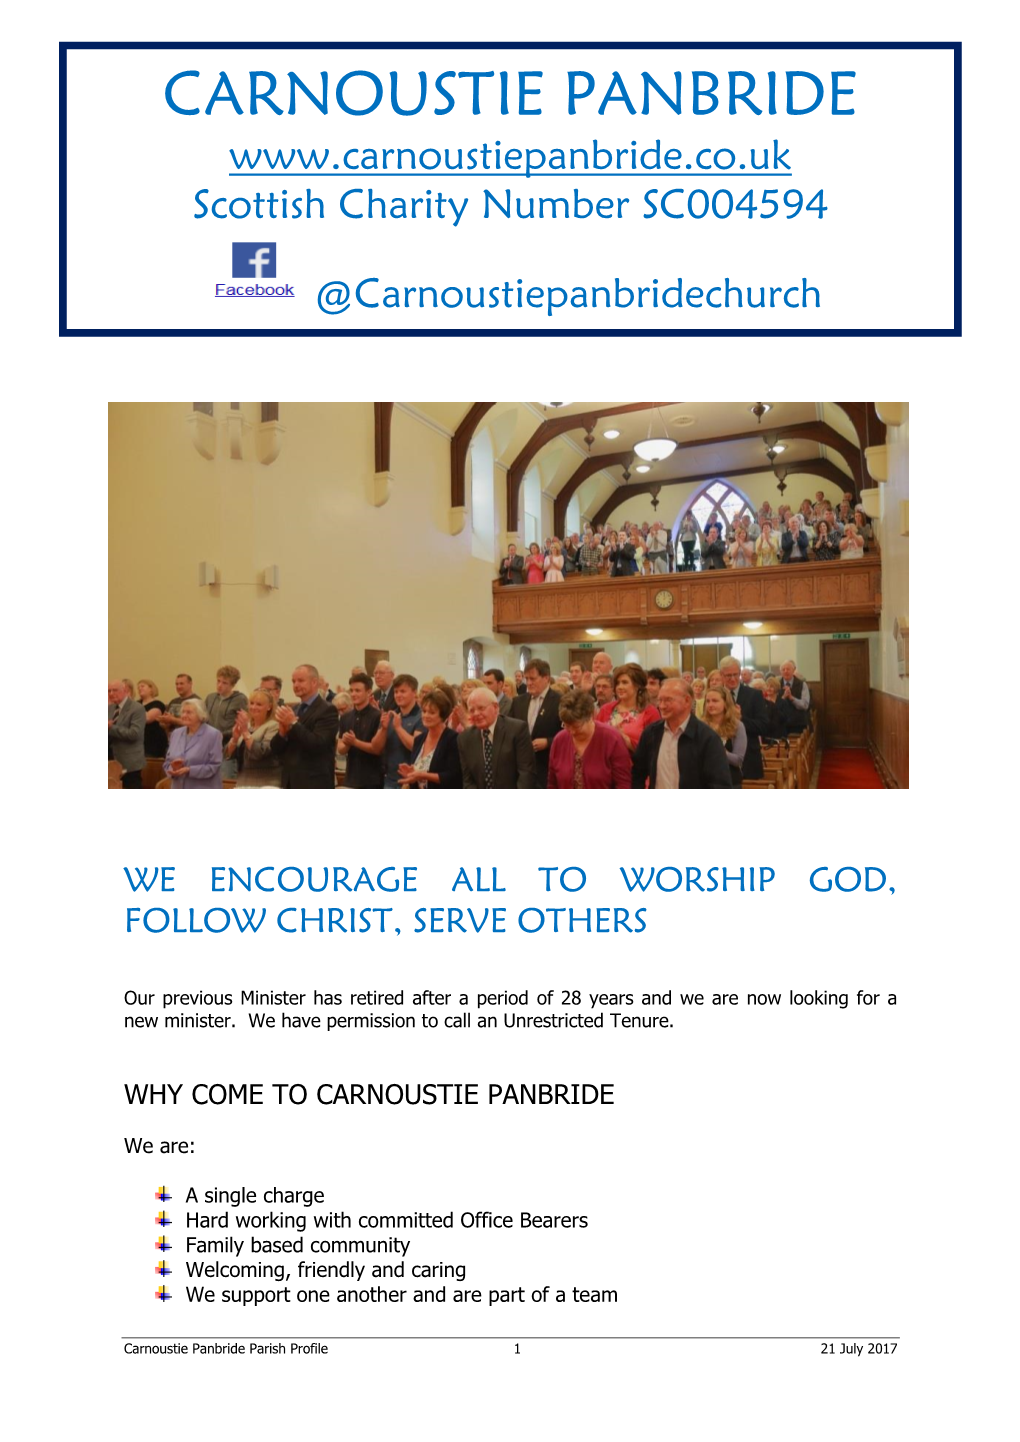 Carnoustie Panbride Parish Profile 1 21 July 2017 WHO WE ARE LOOKING FOR